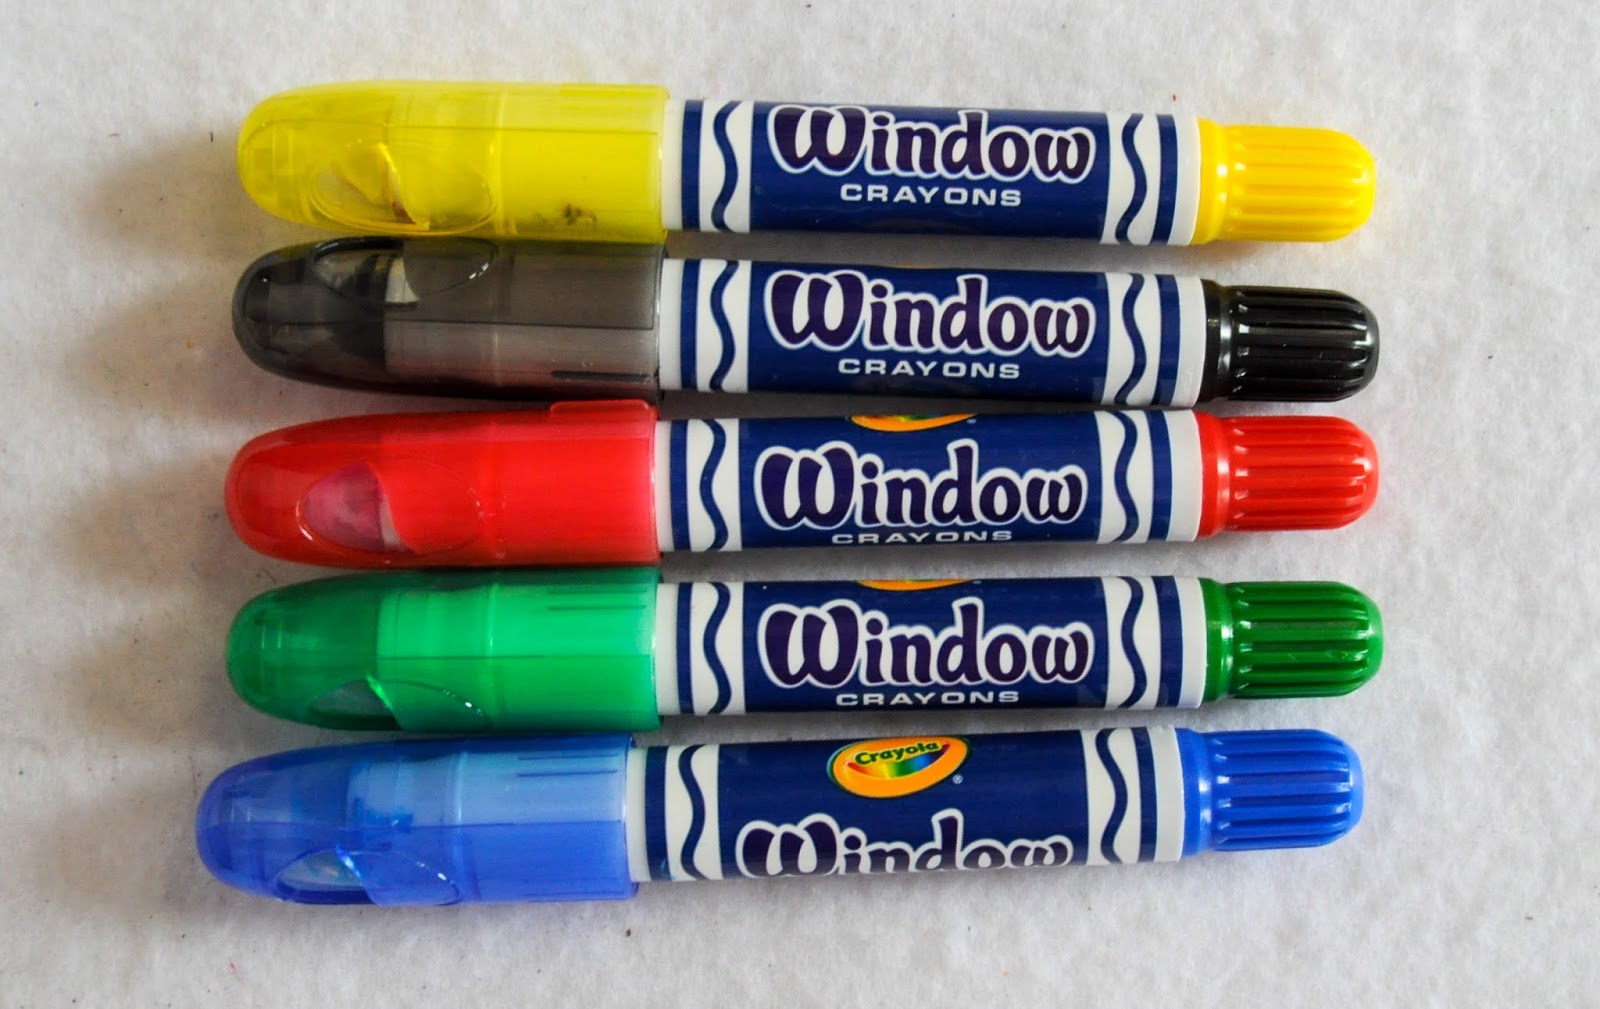 Have you tried these window crayons?? They are so vibrant, and wash of